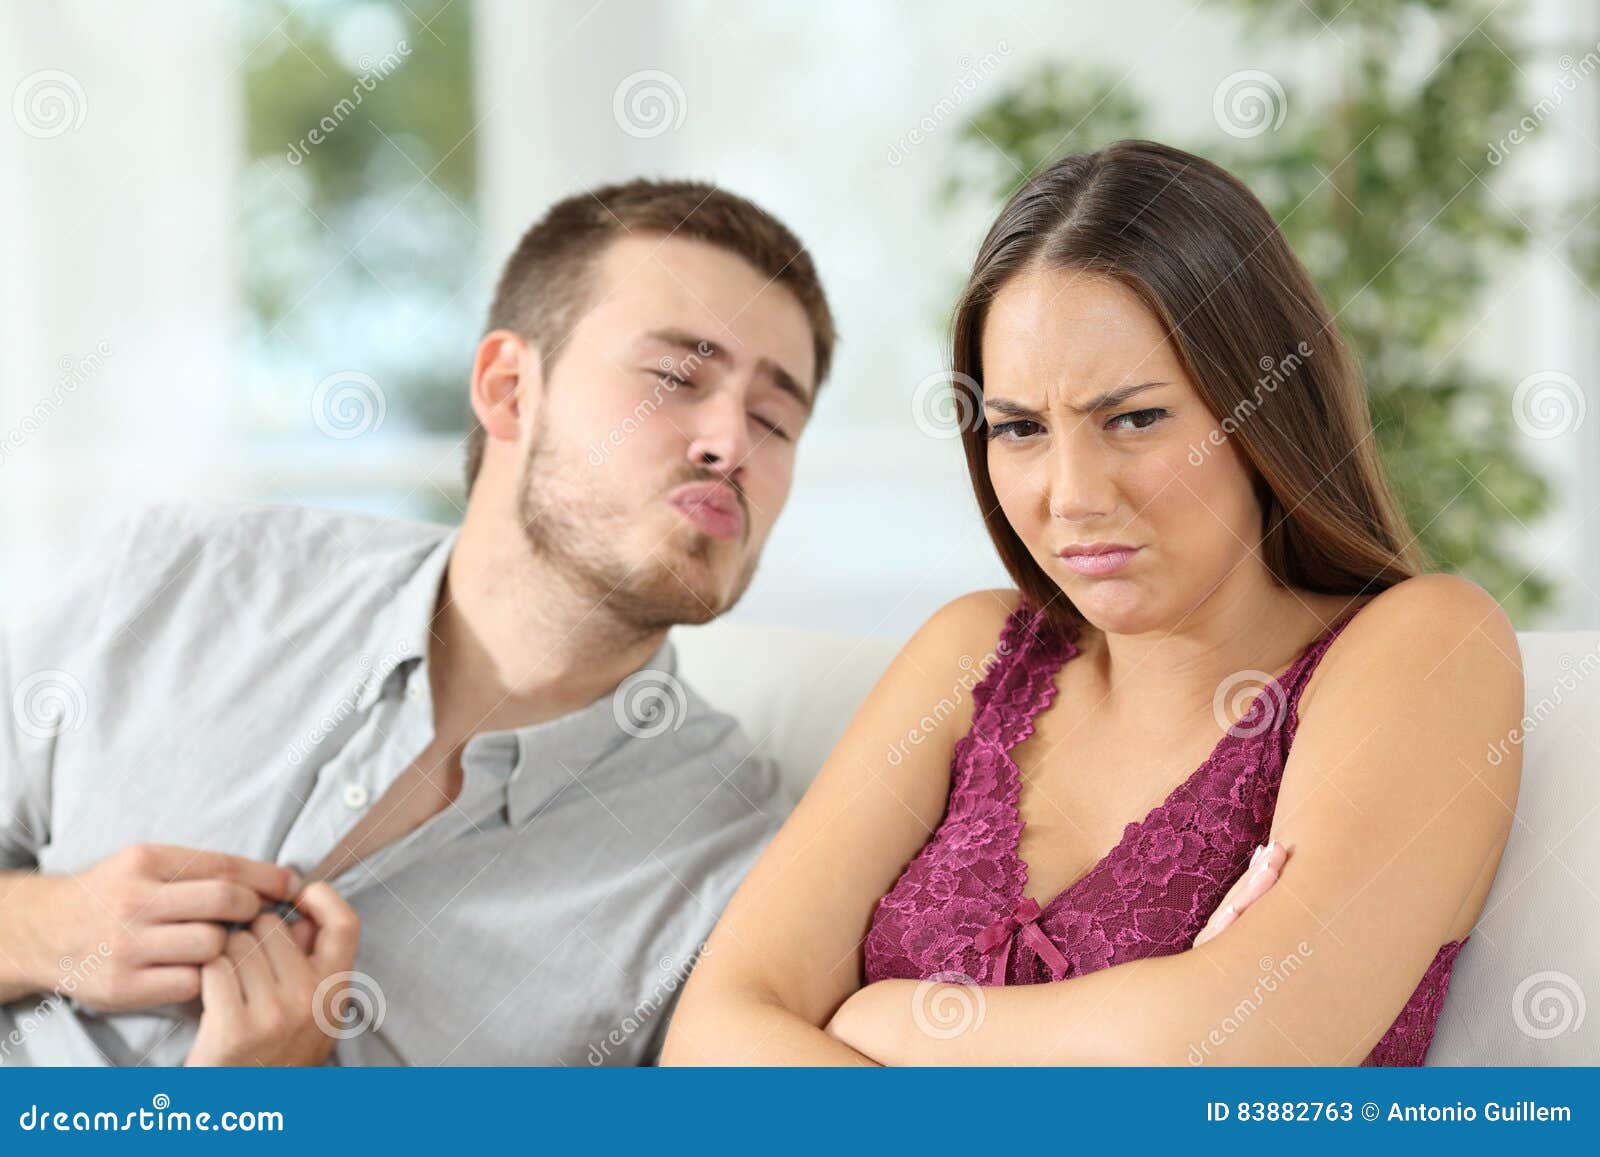 Angry Woman Rejecting a Sex Offer from Her Boyfriend Stock Image pic